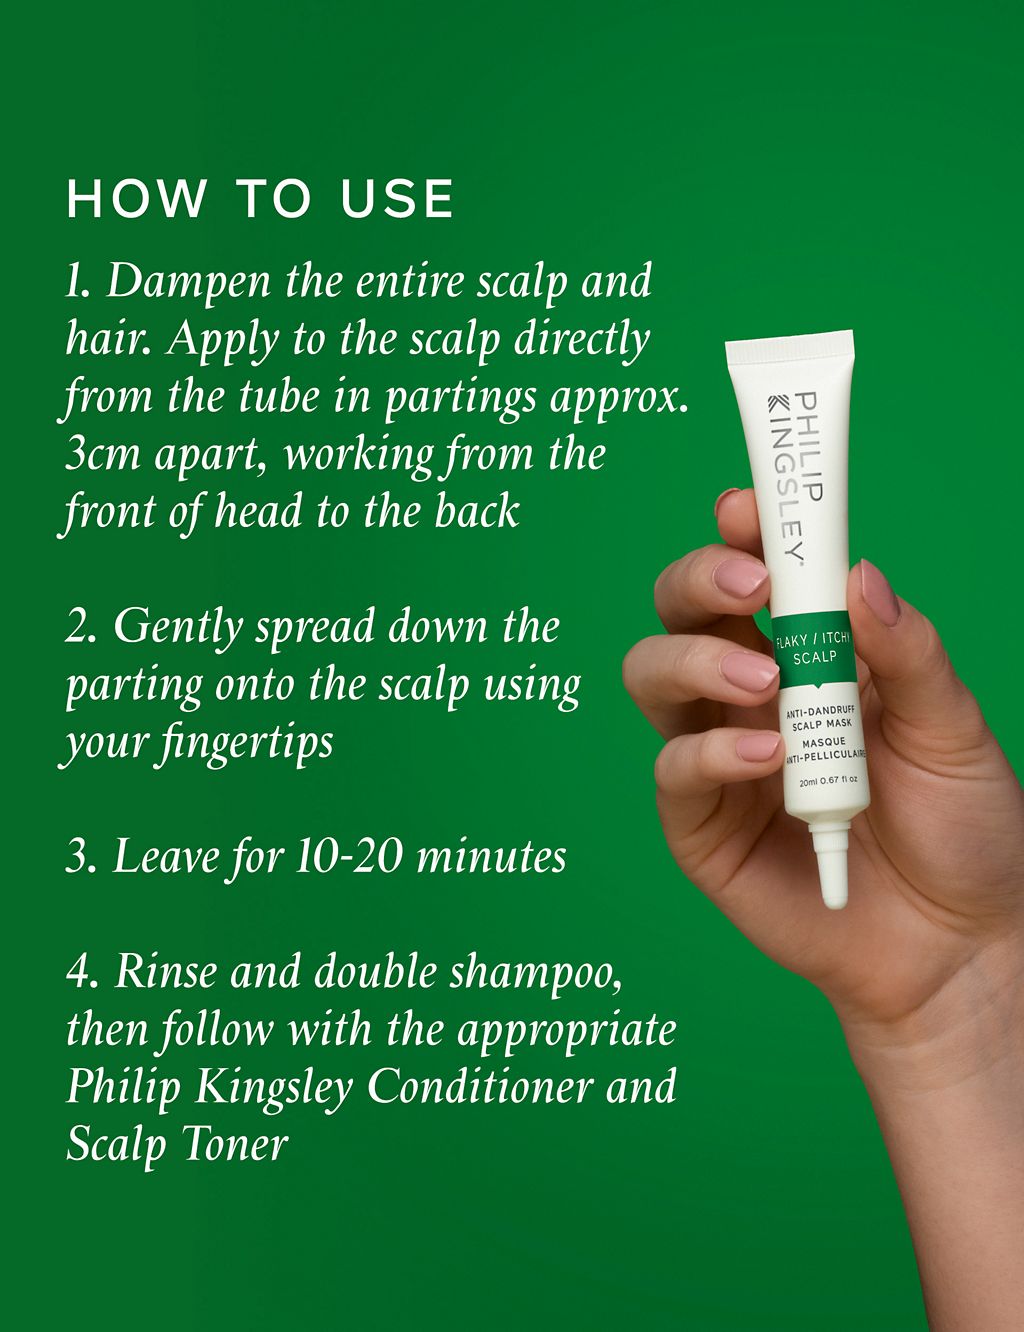 Flaky Itchy Scalp Mask 4 of 8